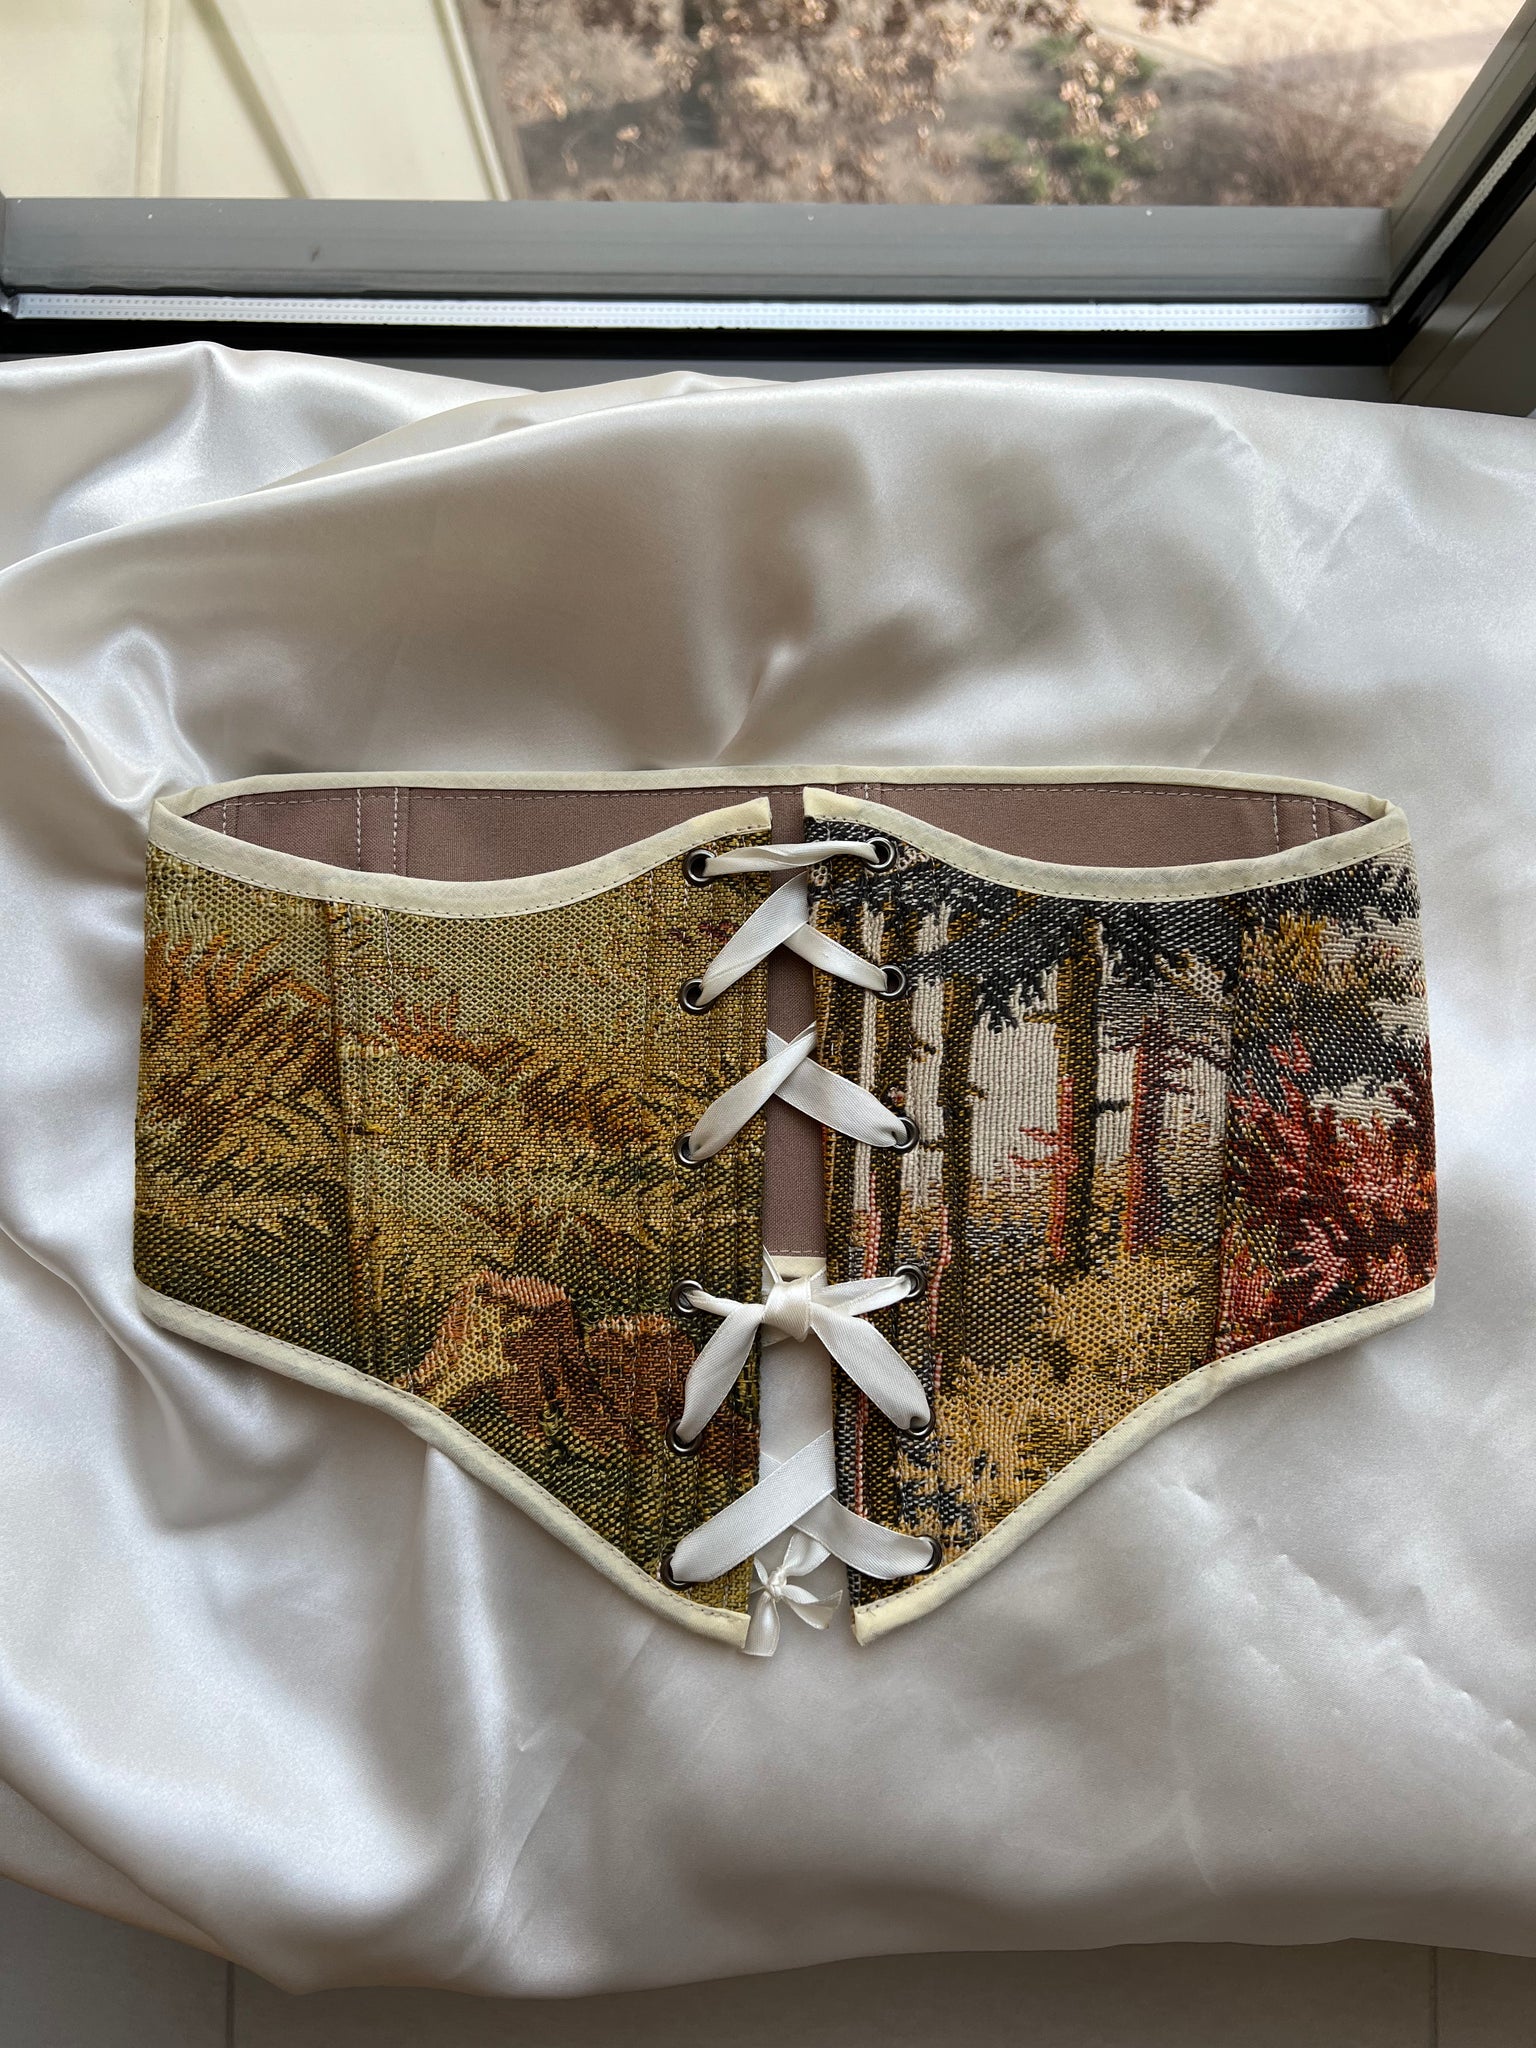 Vintage Tapestry Lace-up Corset Belt, "Forest Sunlight" pattern, Size XS-S (US 0-4)